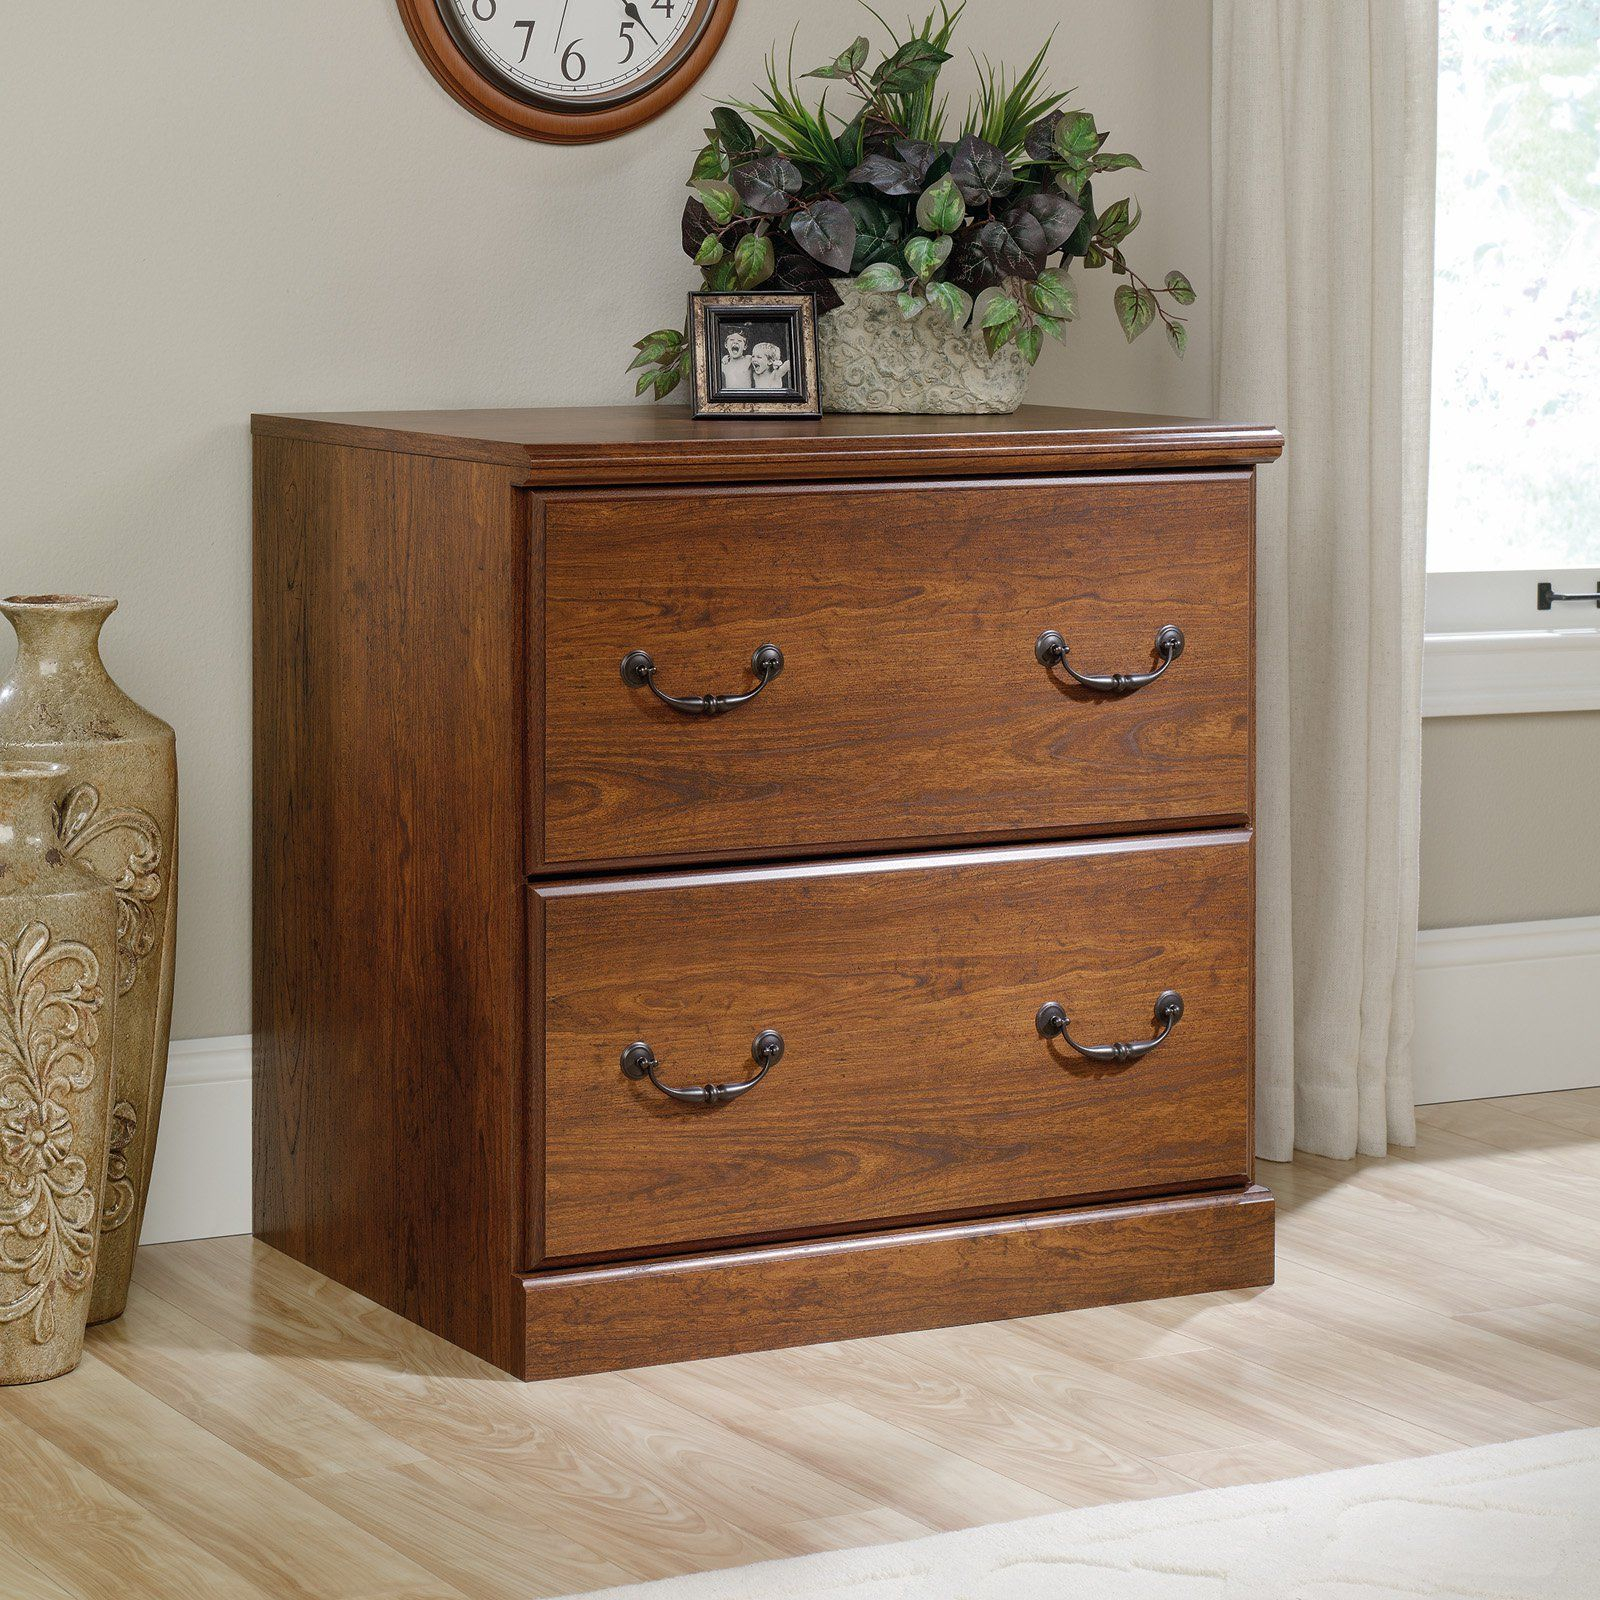 Sauder Orchard Hills Milled Cherry Lateral File Cabinet 418647 pertaining to dimensions 1600 X 1600